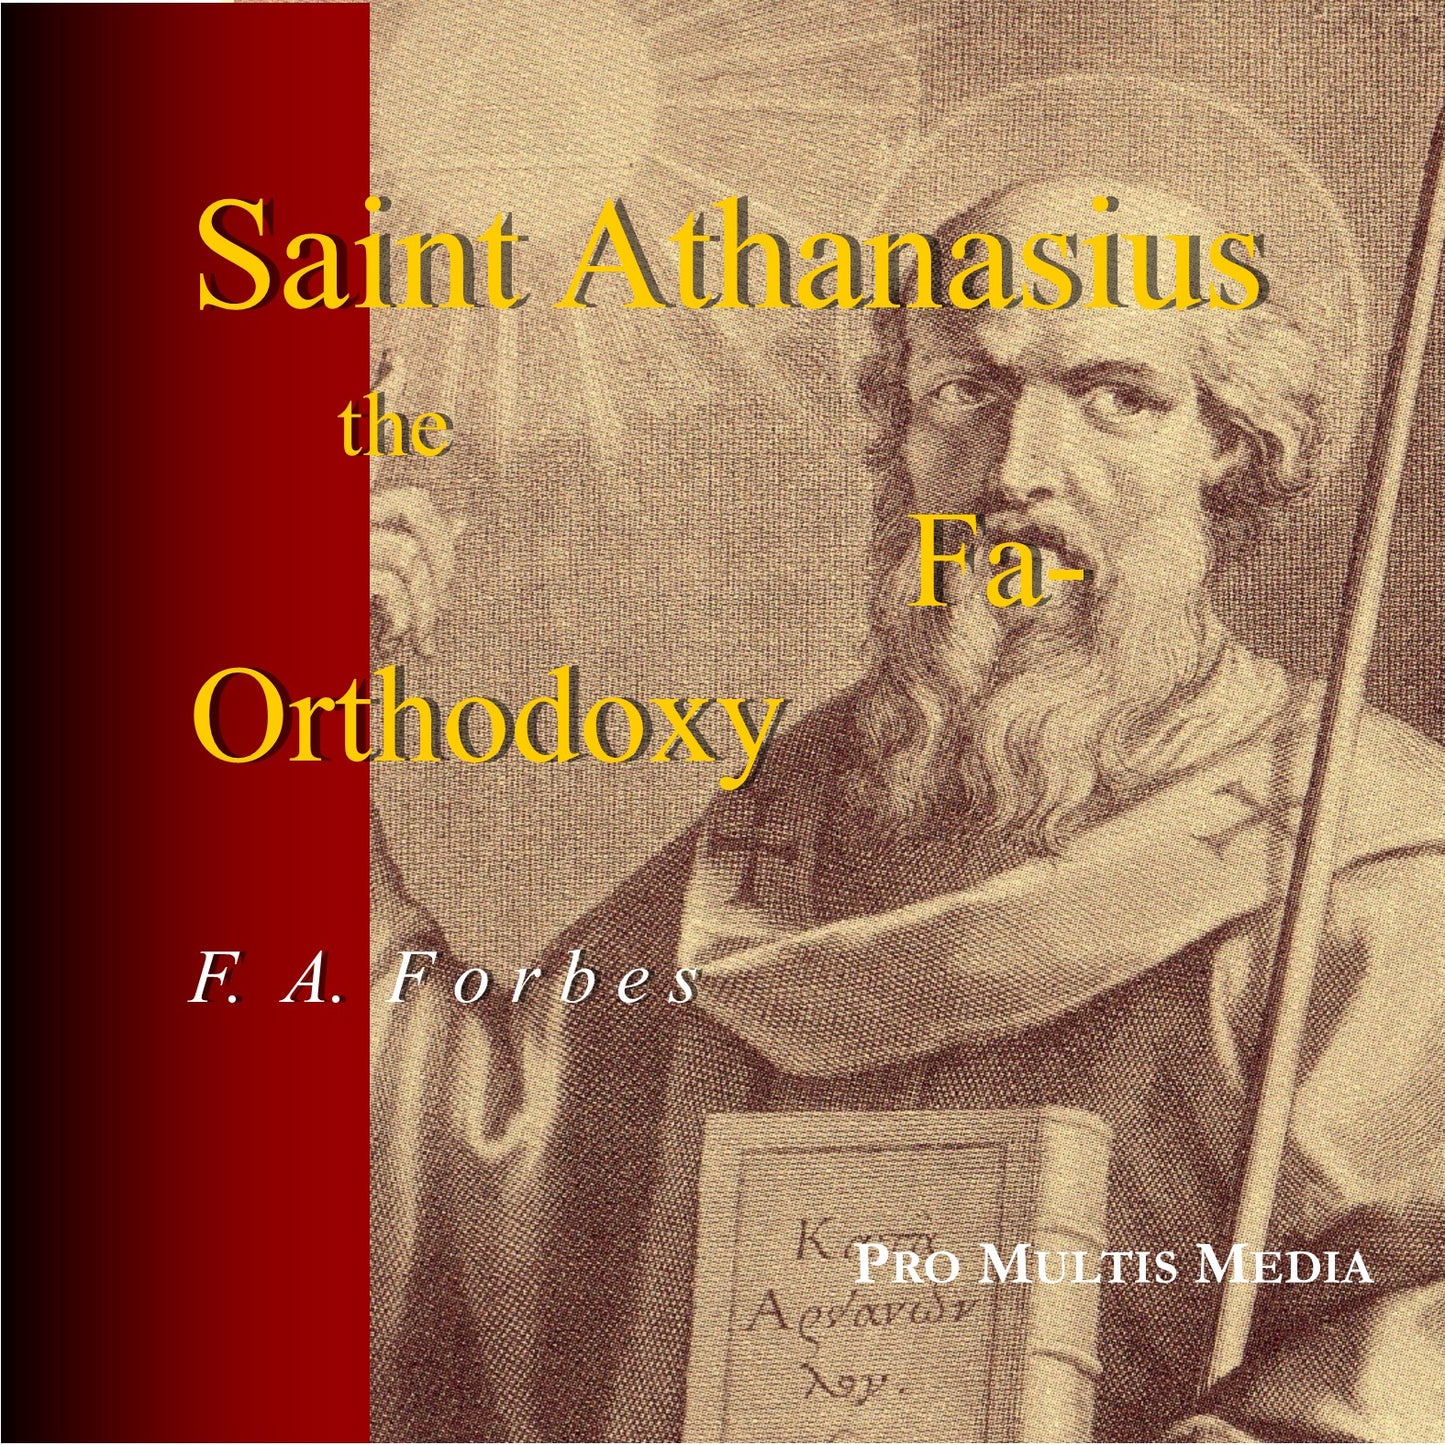 Saint Athanasius the Father of Orthodoxy audiobook (CD)